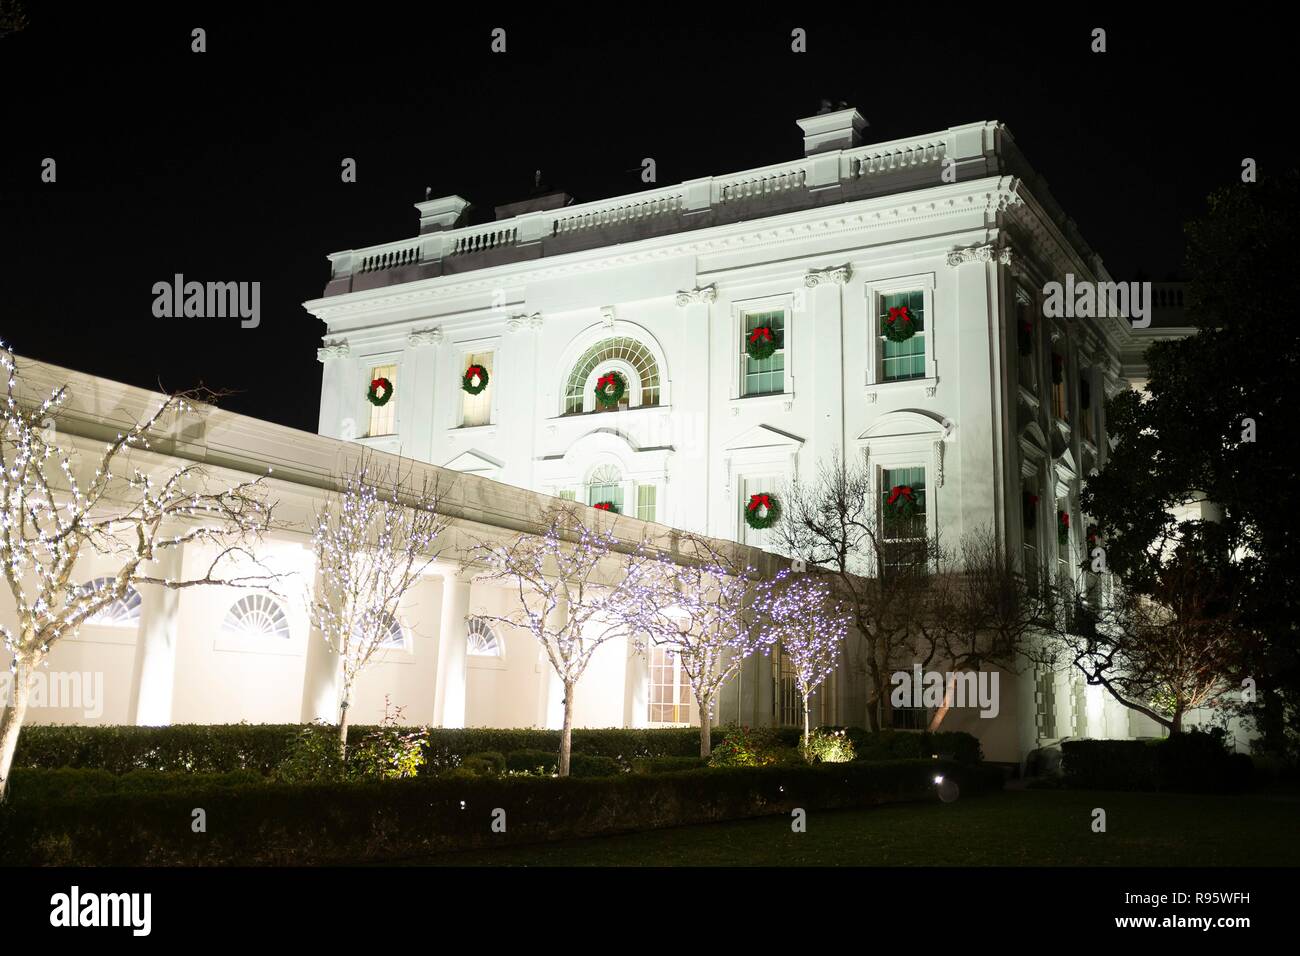 The White House decorated for Christmas and lighted at night December 12, 2018 in Washington, DC. Stock Photo